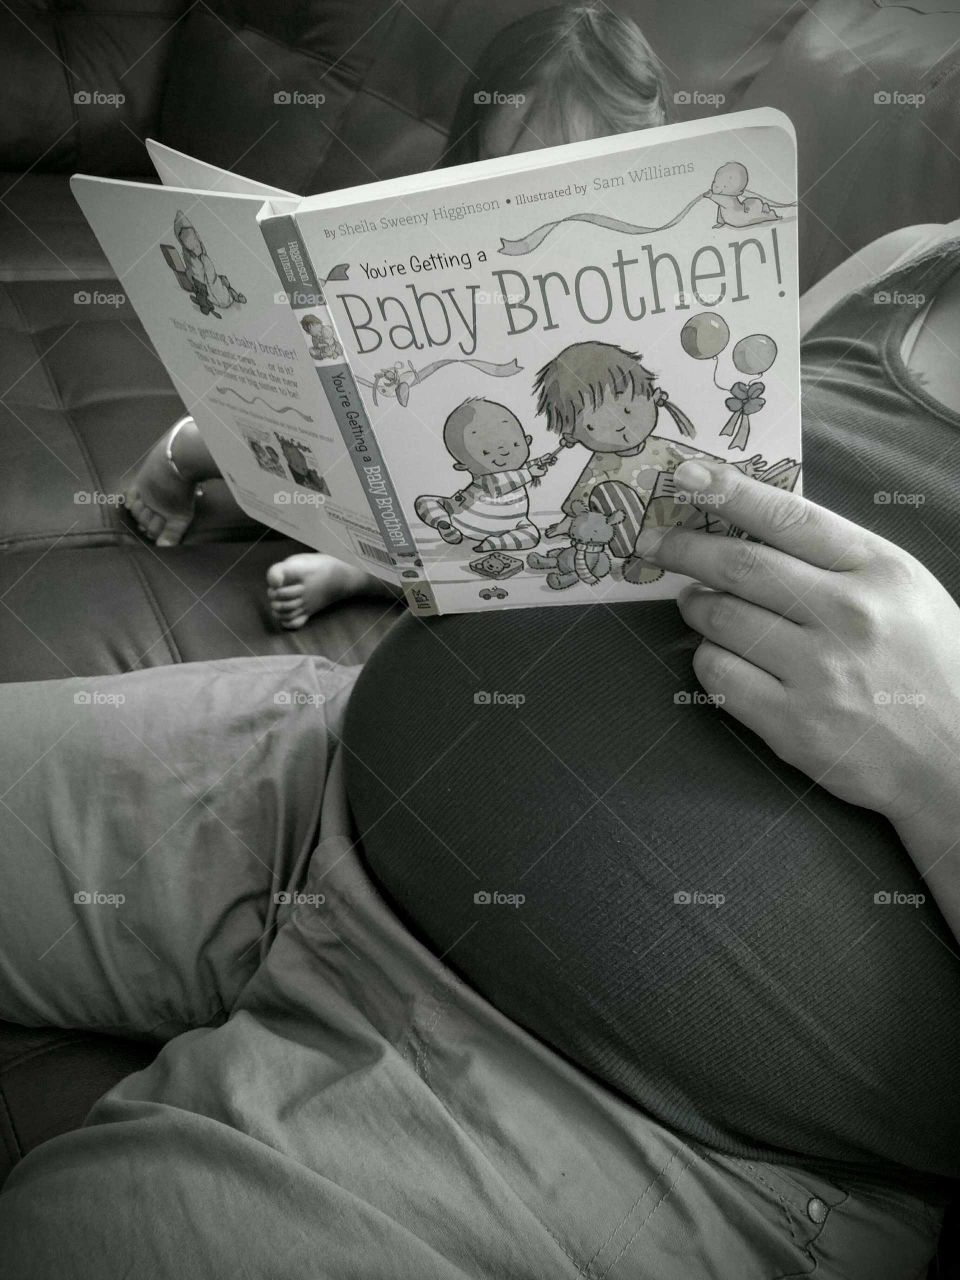 Reading about little brother